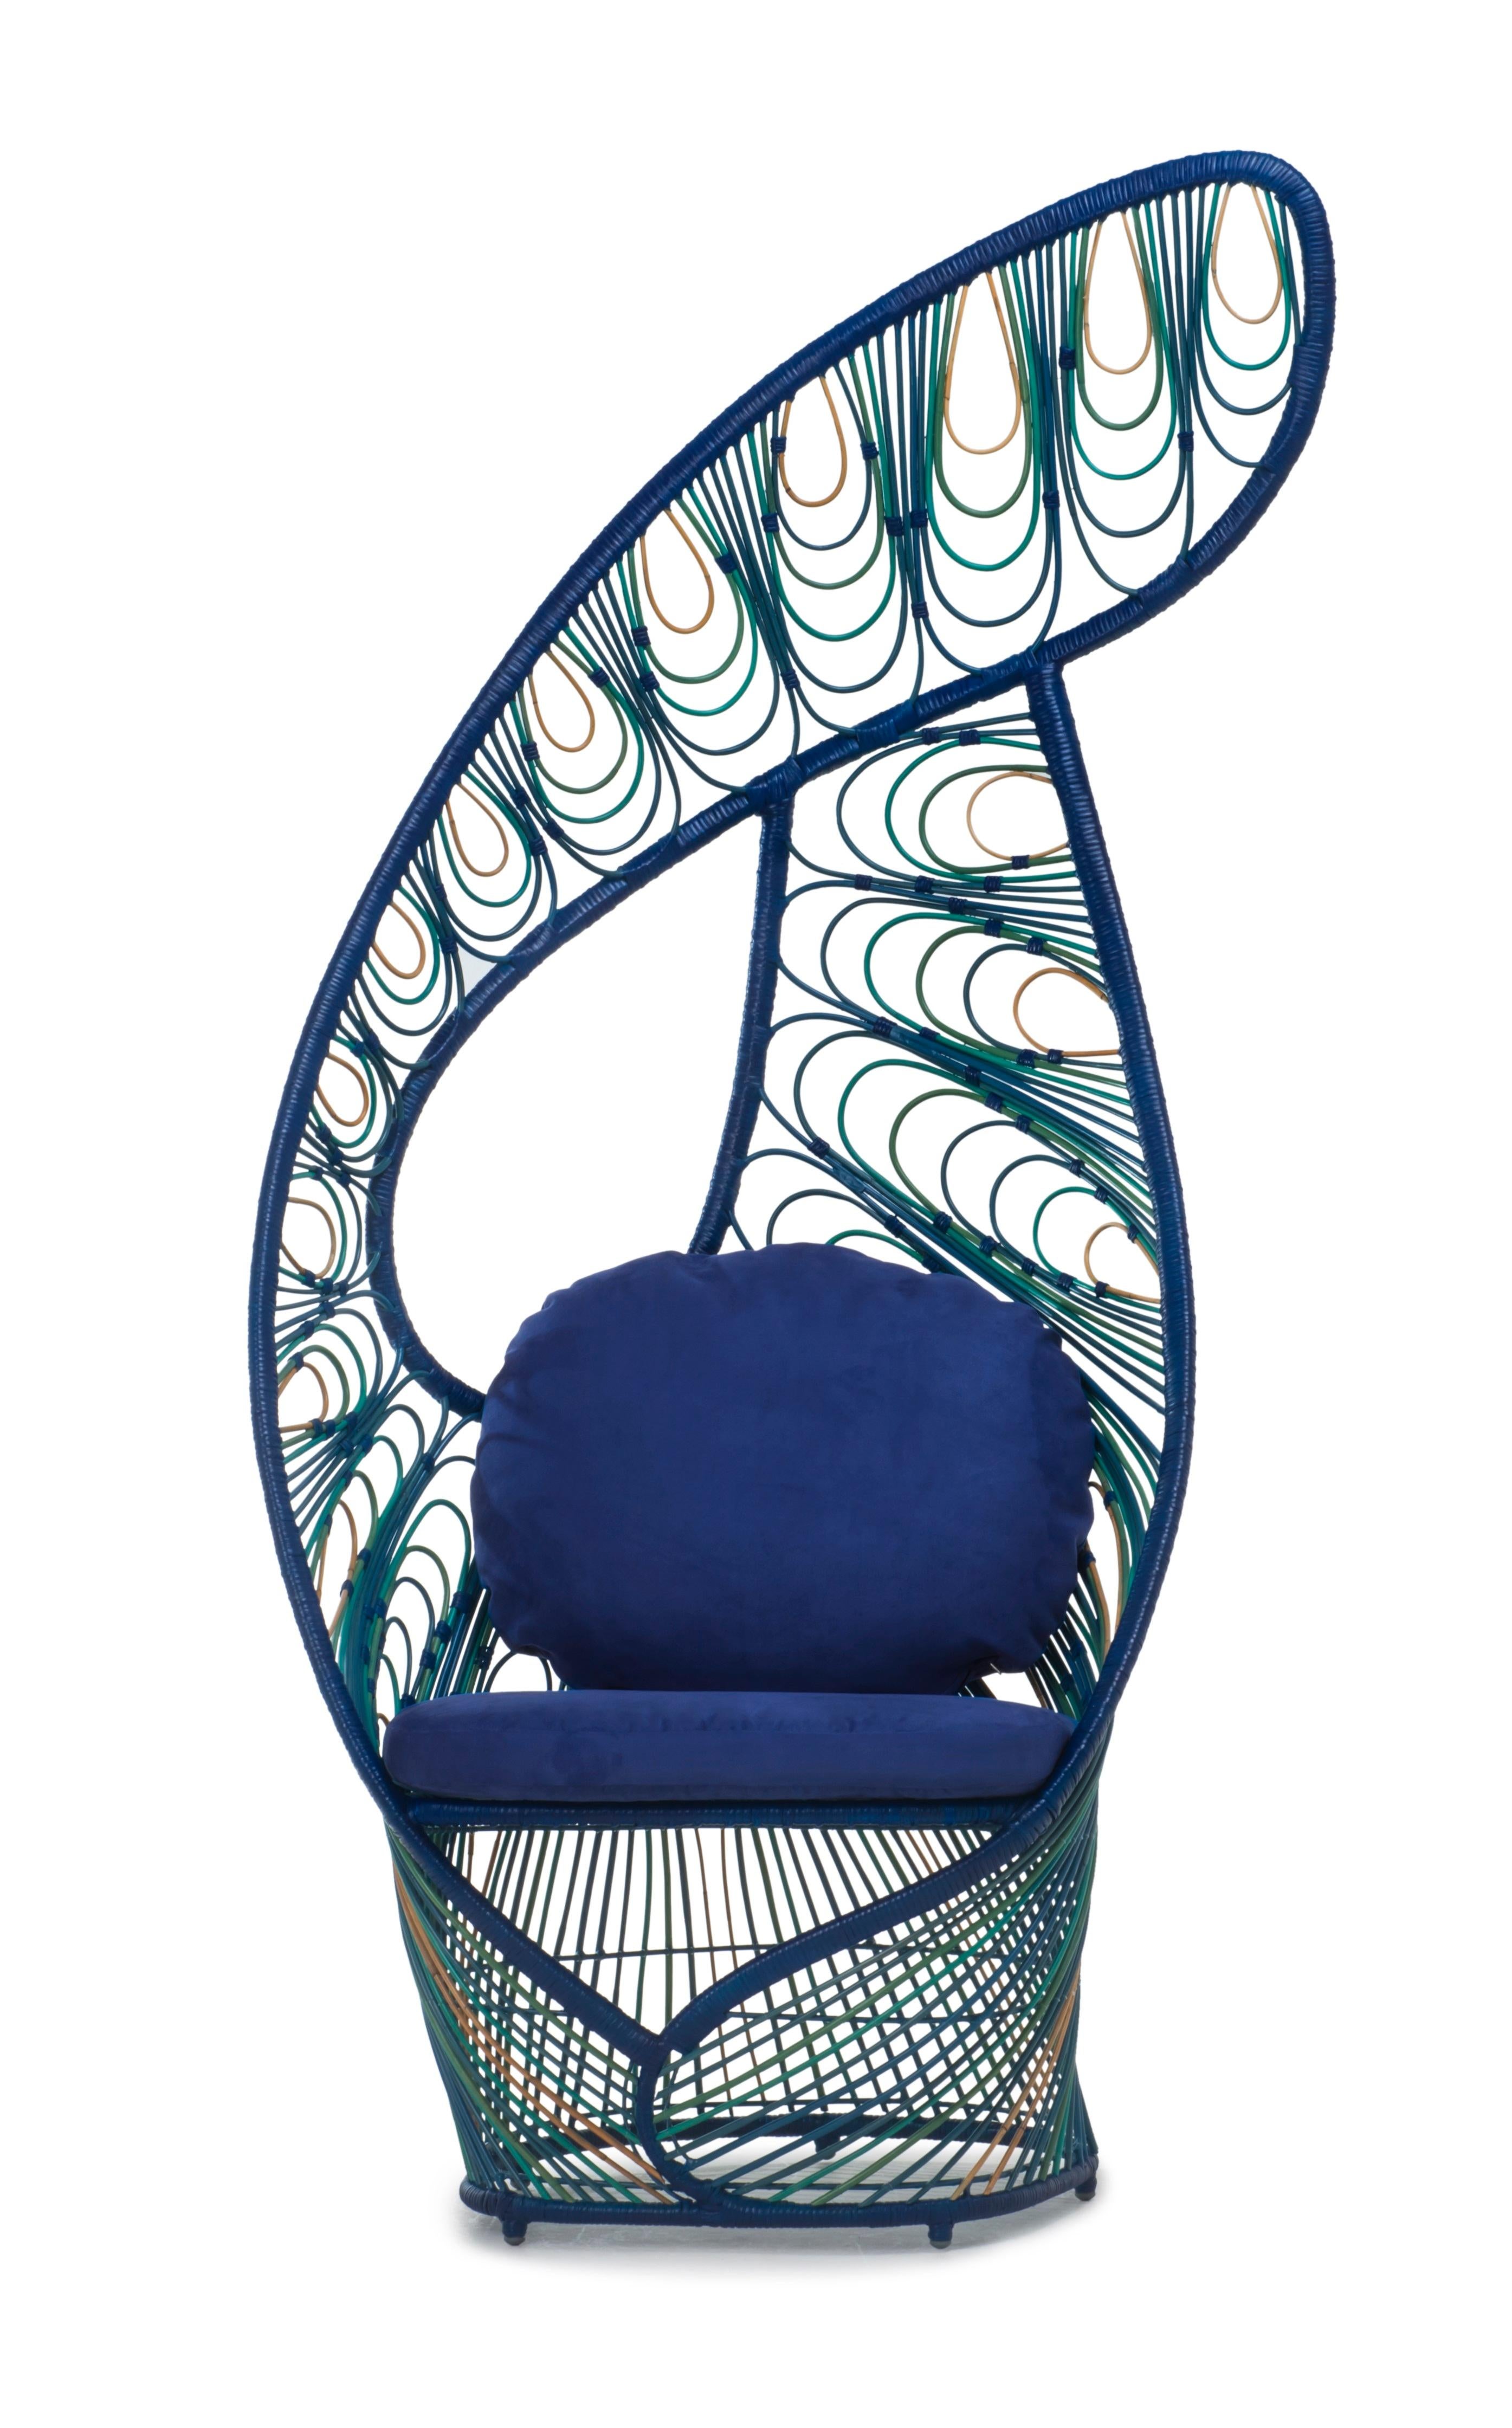 Peacock Easy armchair by Kenneth Cobonpue.
Materials: Rattan
Also available in other colors.
Dimensions: 68.5 cm x 90 cm x H 198 cm 

Peacock is a modern take on the traditional wicker chair of the same name. Like the regal bird, this lounge chair